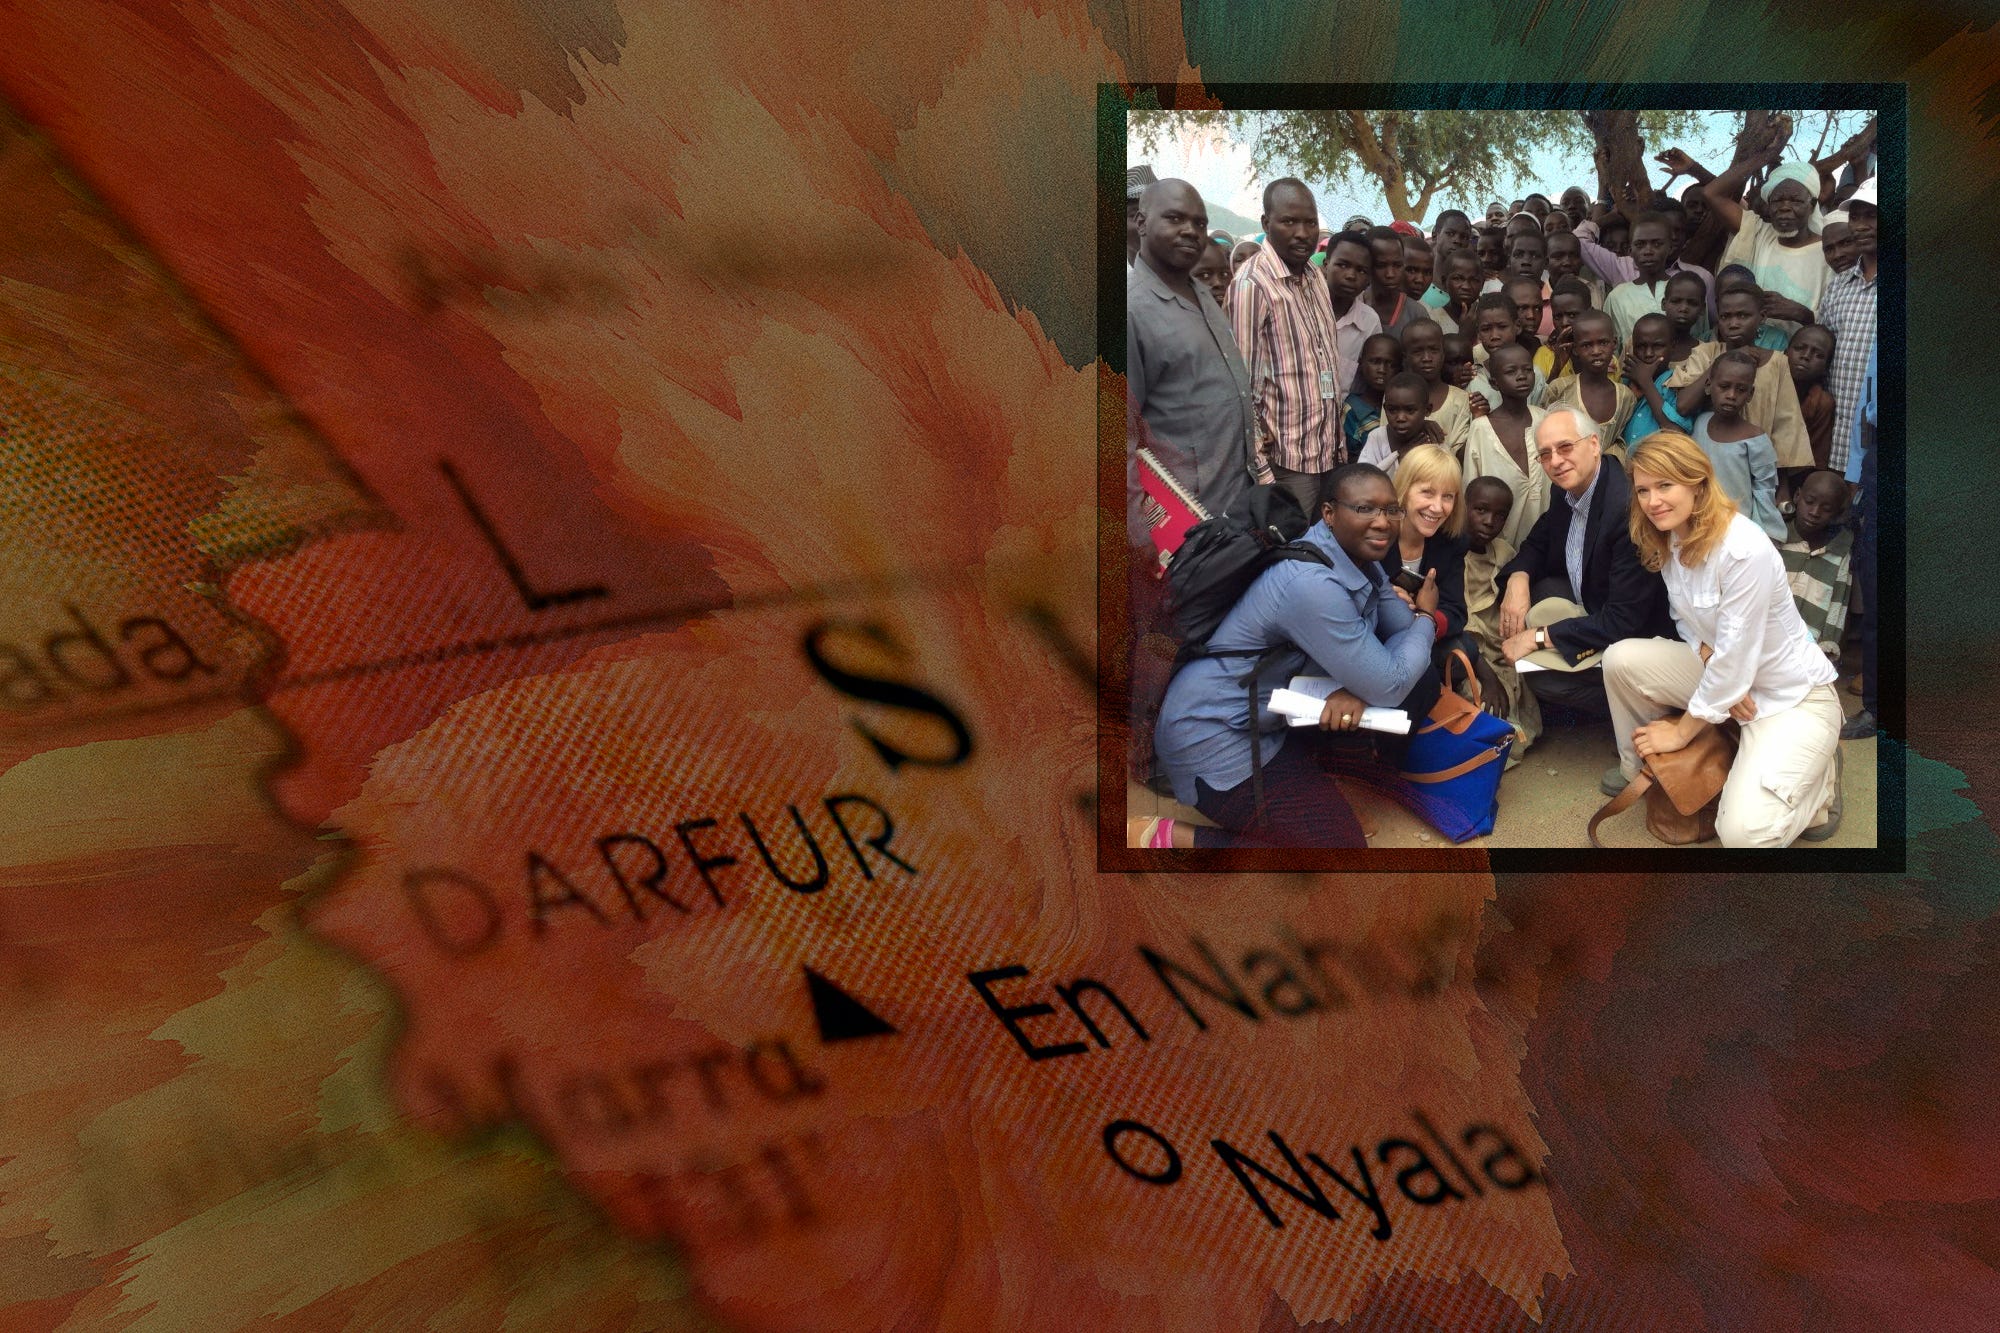 Jacqueline Burns, bottom right, with former Special Envoy for Sudan and South Sudan, Ambassador Donald Booth, at an Internally Displaced Person camp in Darfur, Sudan, 2016. Photo courtesy of Jacqueline Burns; images by oxygen and JeanUrsula/Getty Images; design by Chara Williams/RAND Corporation